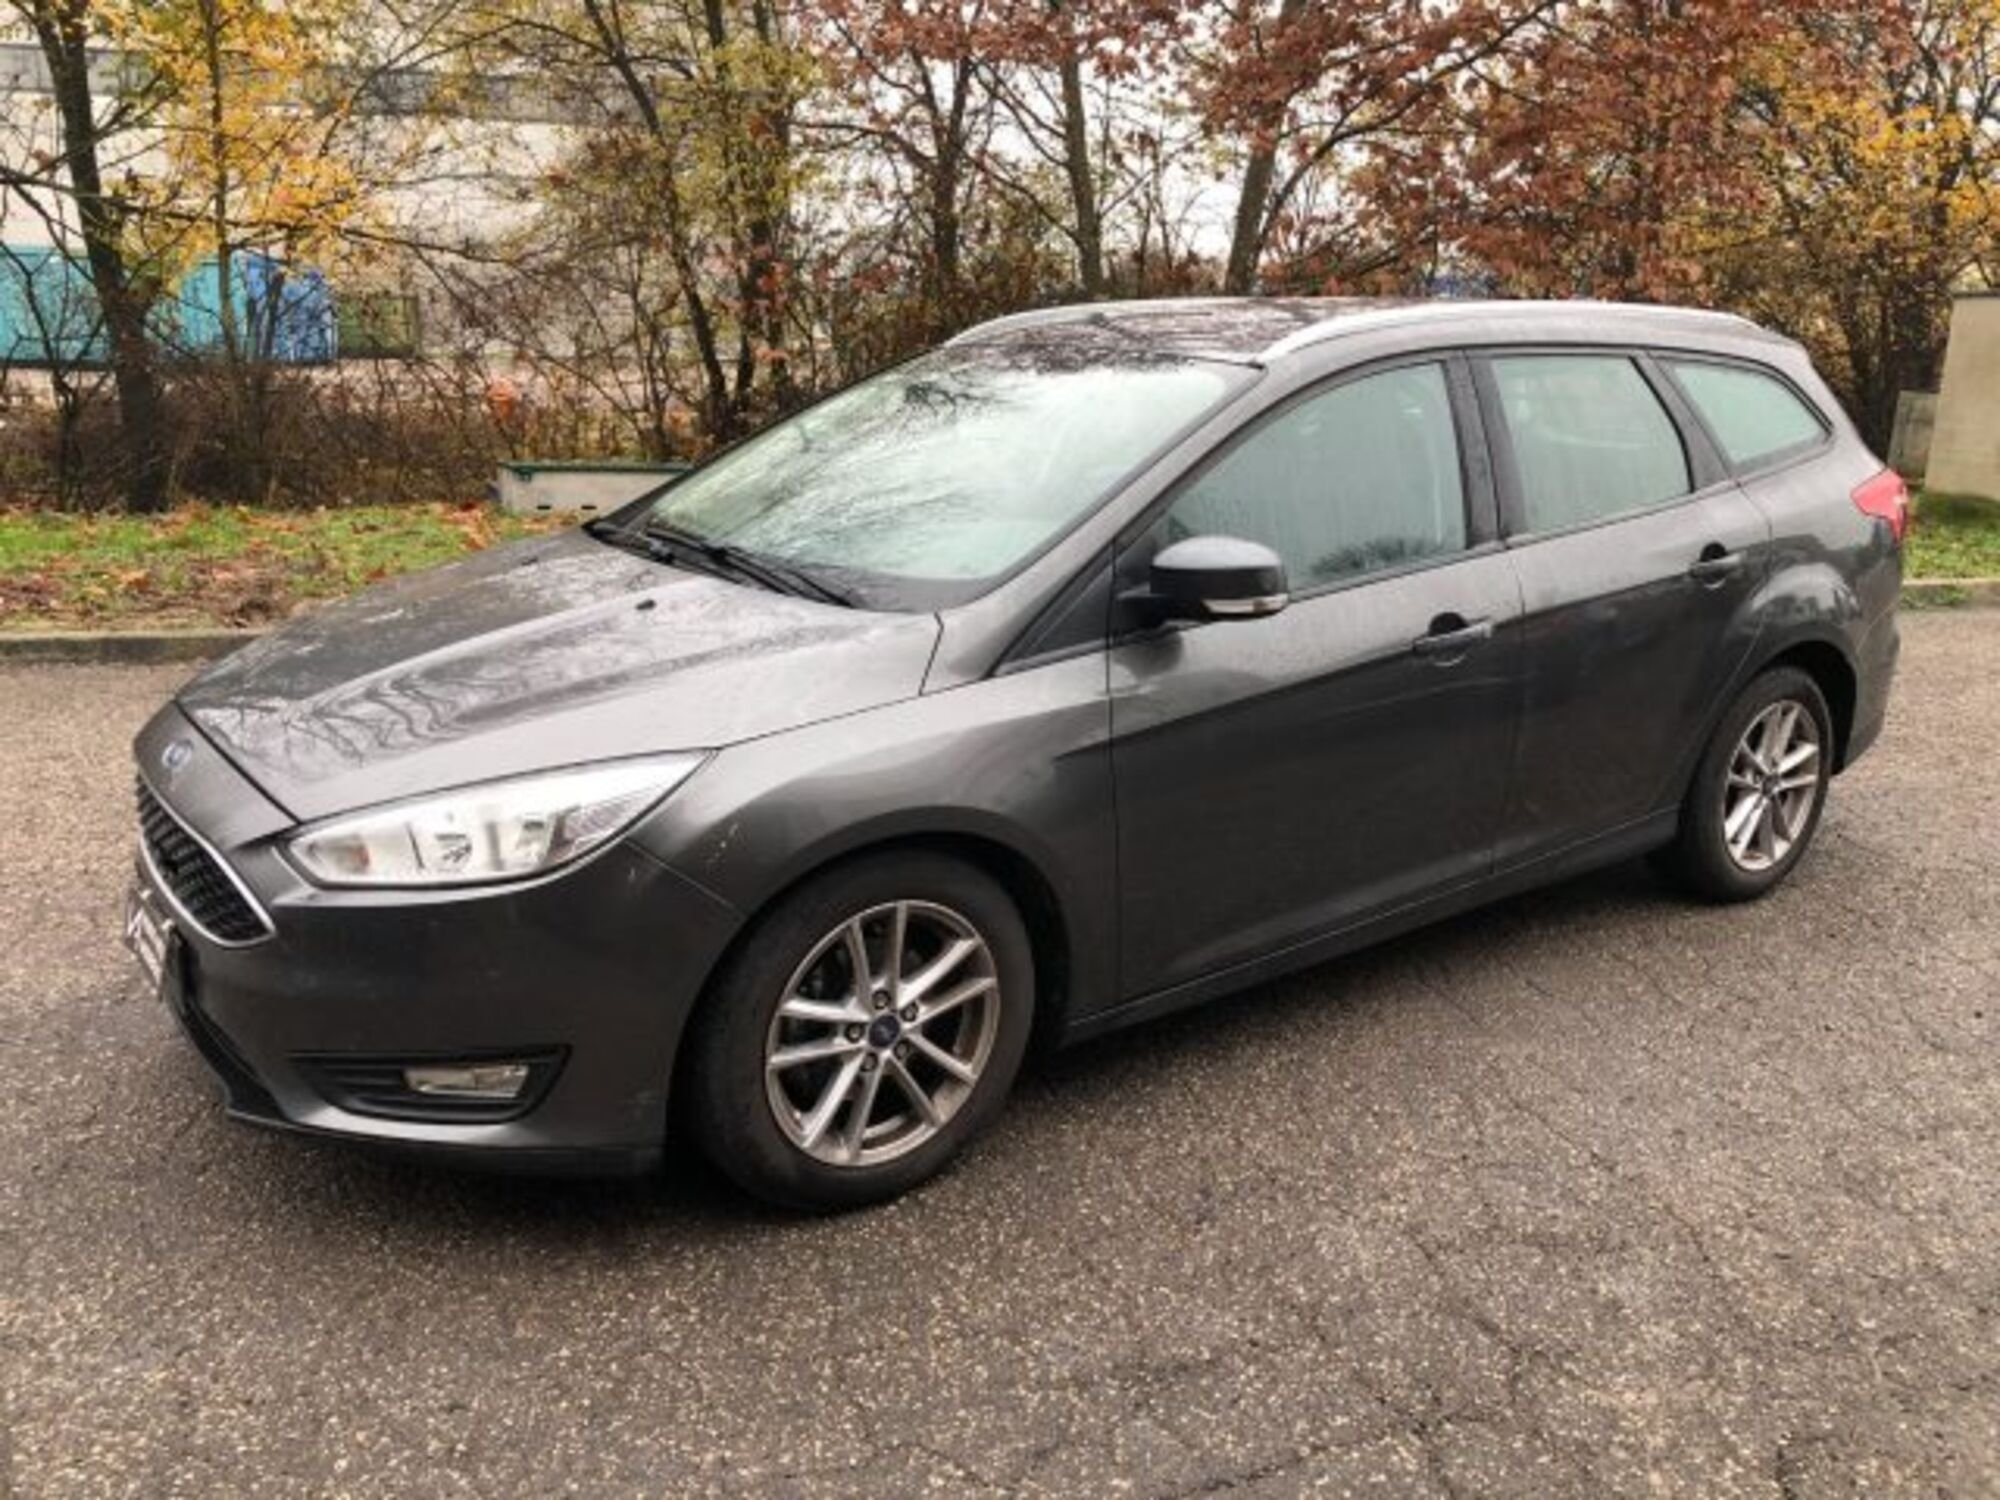 Ford Focus Station Wagon 1.5 TDCi 120 CV Start&Stop Powershift SW Business